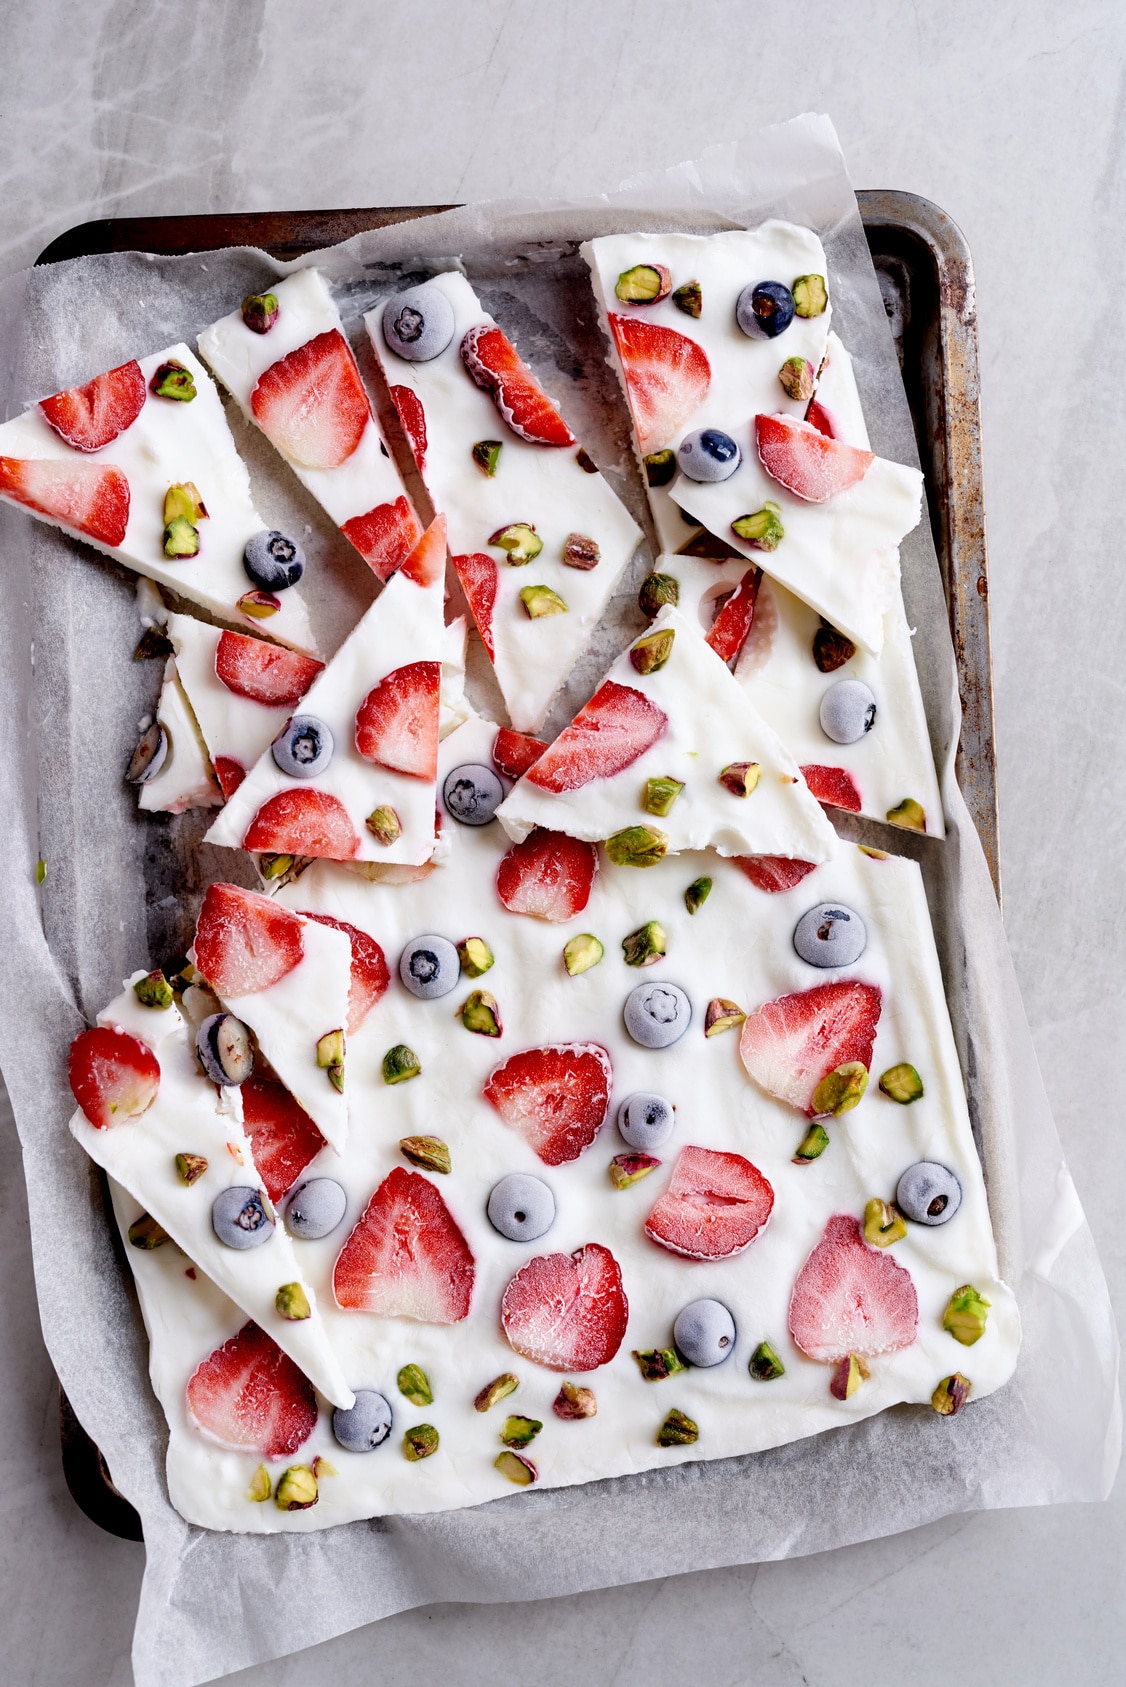 frozen yogurt bark with strawberries, blueberries, pistachios on a parchment lined baking sheet